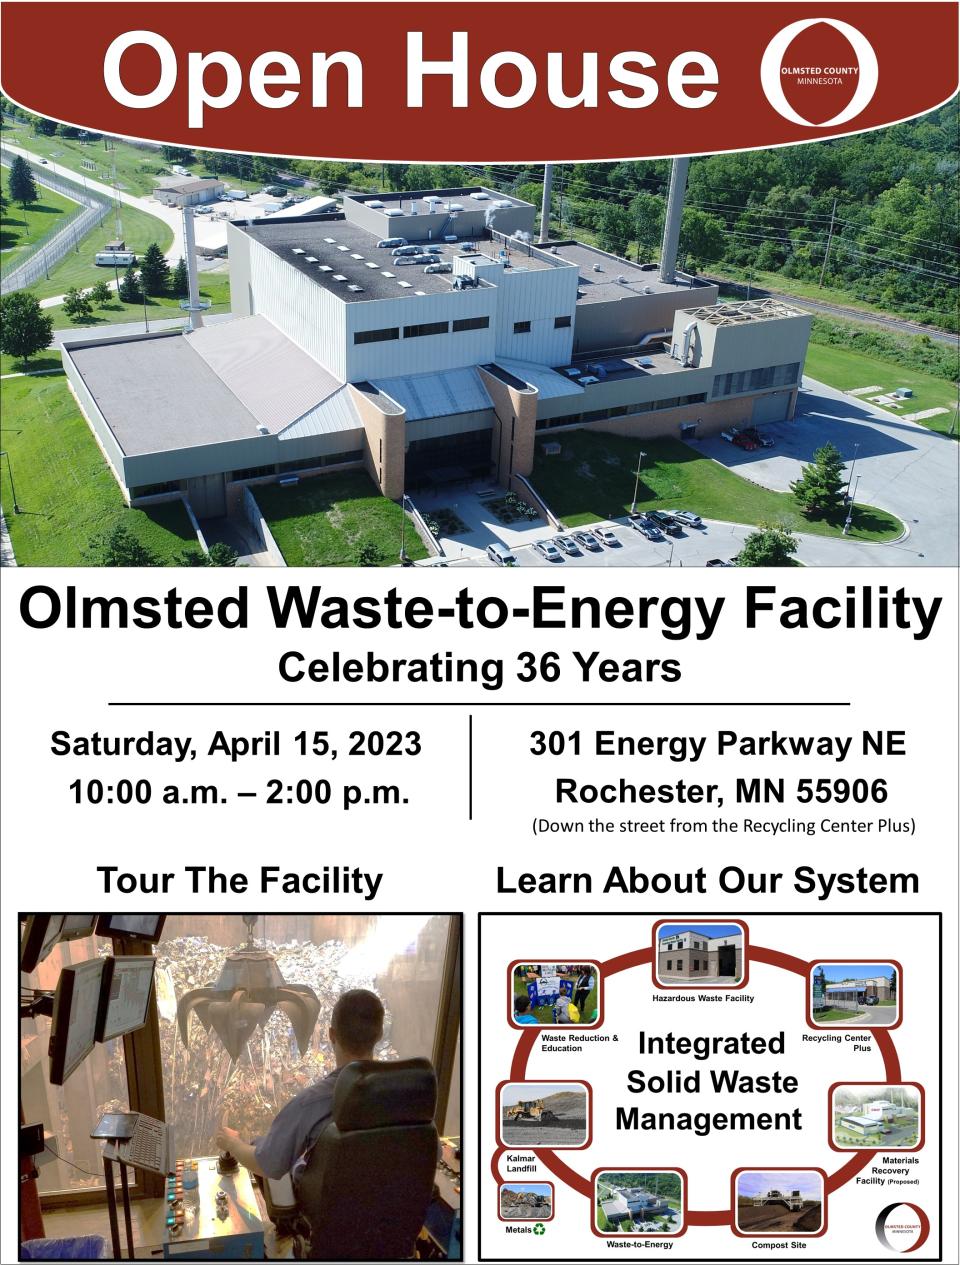 OWEF Open House Poster - Saturday, April 15, from 10:00 a.m.</body></html>